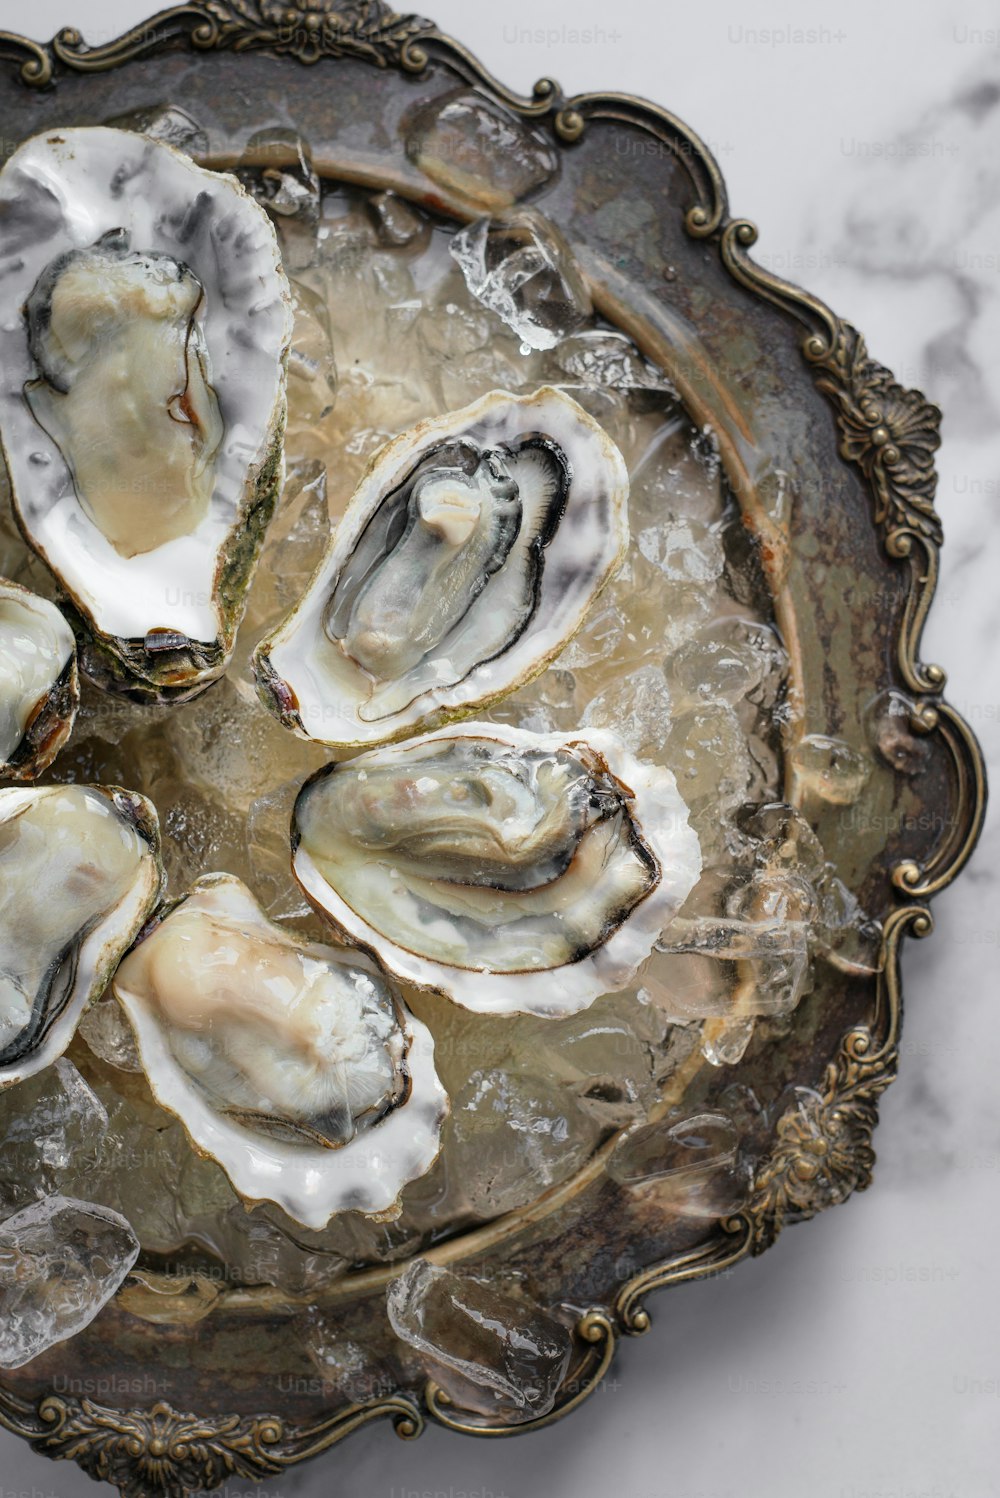 a plate of oysters on ice on a table